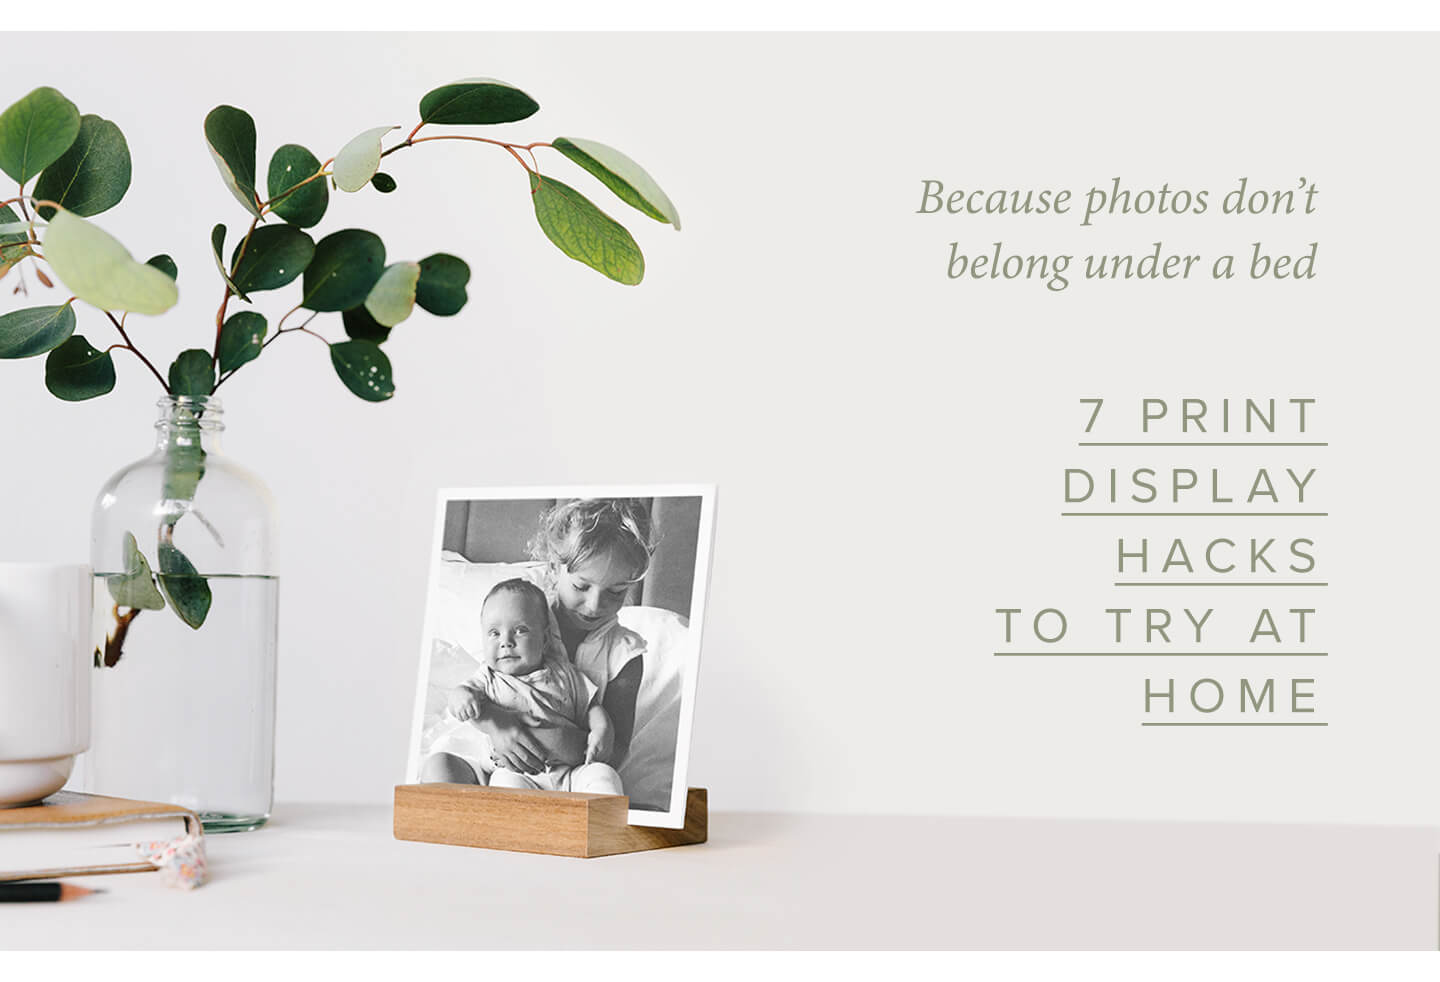 Because photos don't belong under a bed | 7 Print Display Hacks To Try At Home